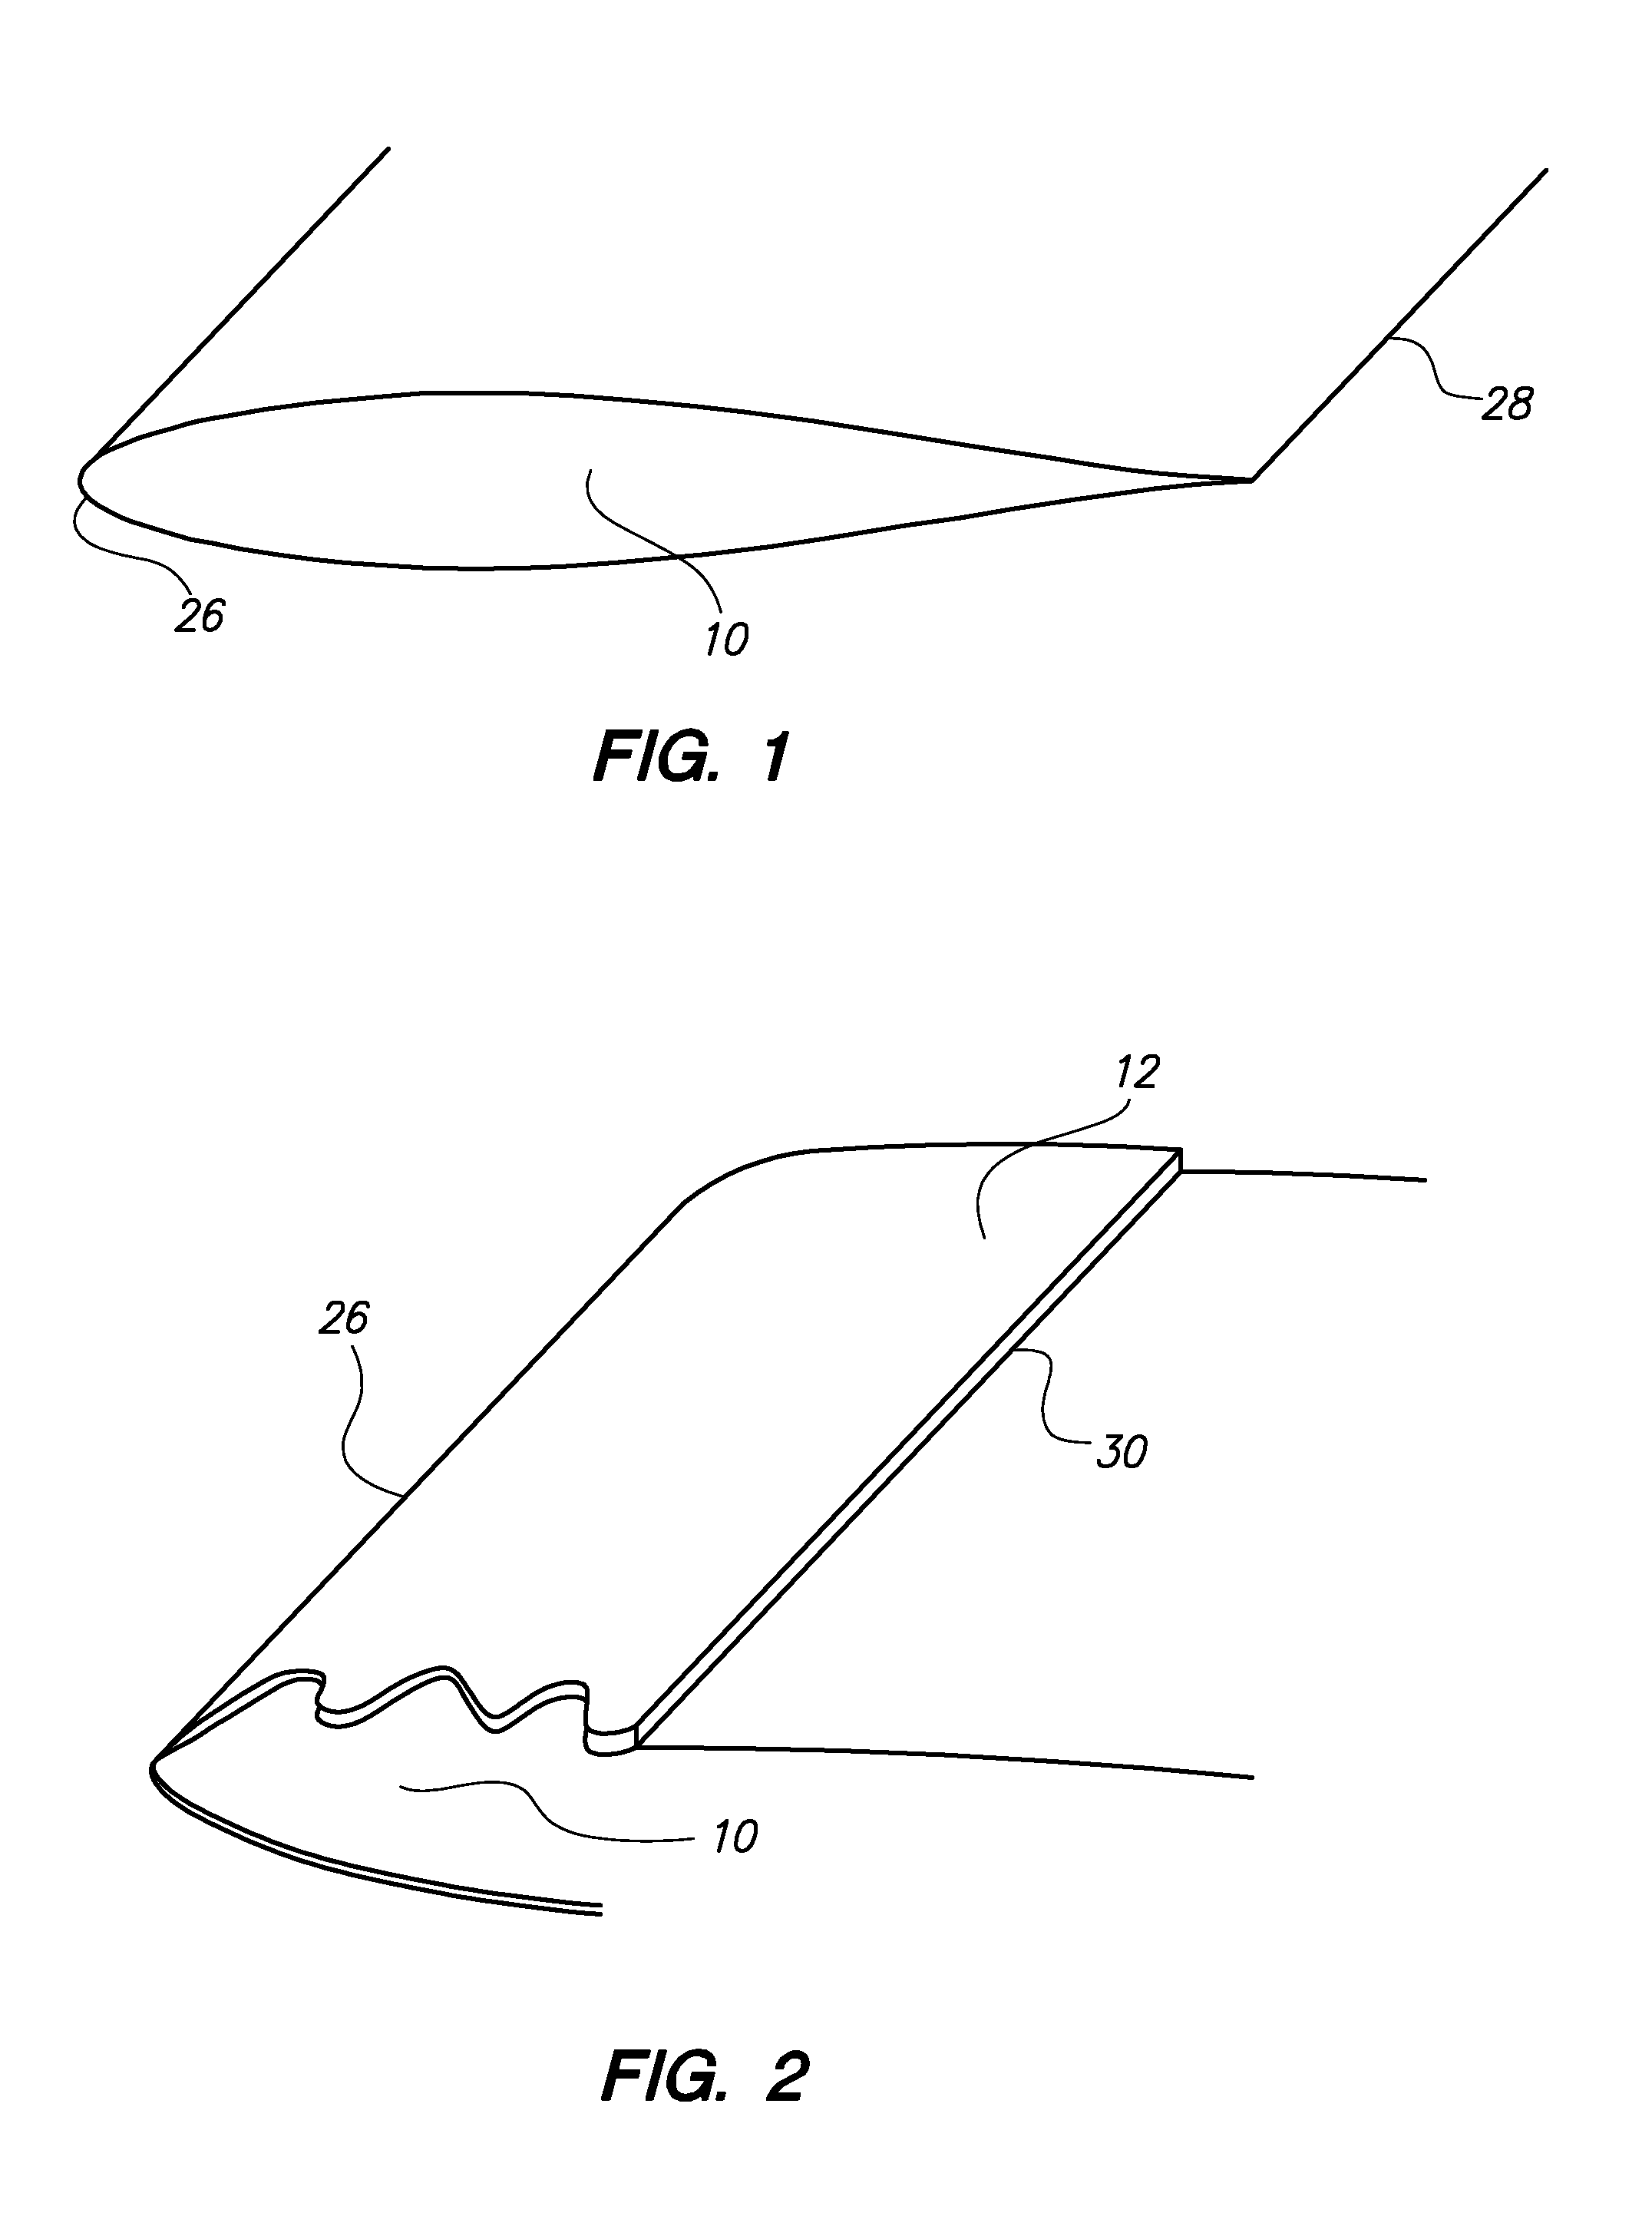 Application of conformal sub boundary layer vortex generators to a foil or aero/ hydrodynamic surface